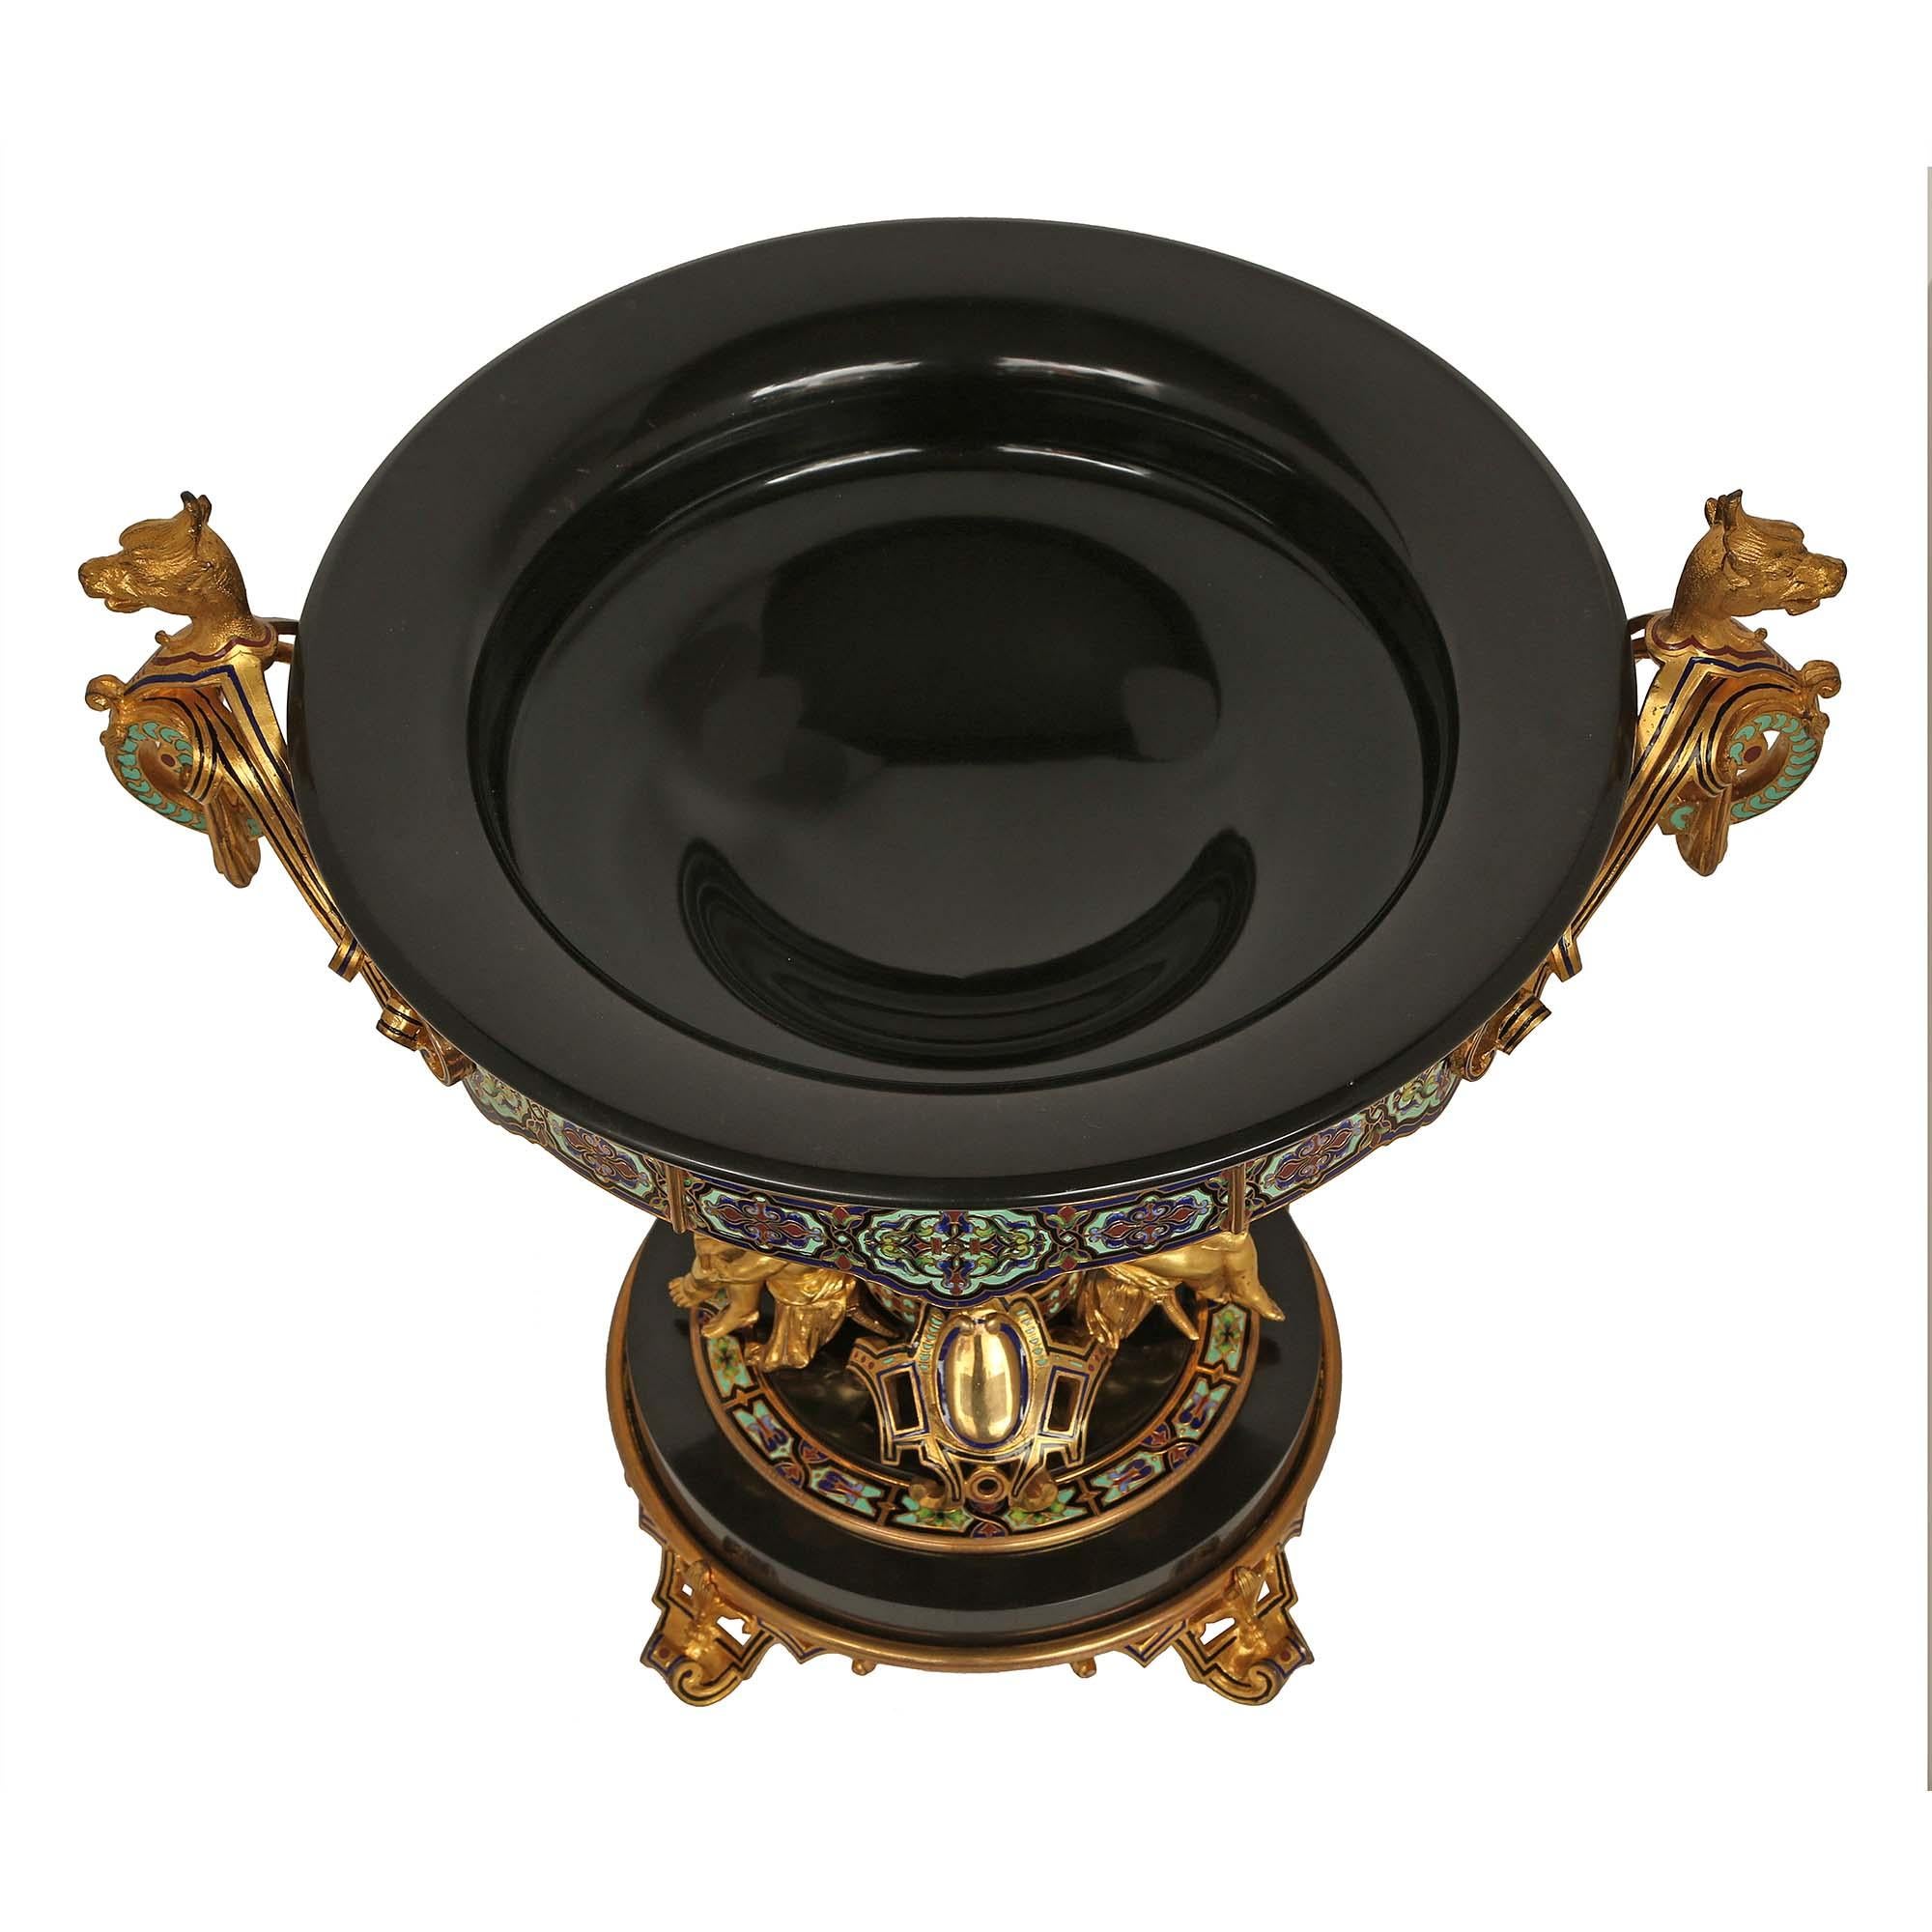 An important and most impressive French 19th century Belle Époque Period black Belgian marble, ormolu and cloisonné signed centerpiece. The striking and large scale centerpiece is raised by four pierced ormolu scrolled feet each decorated with a